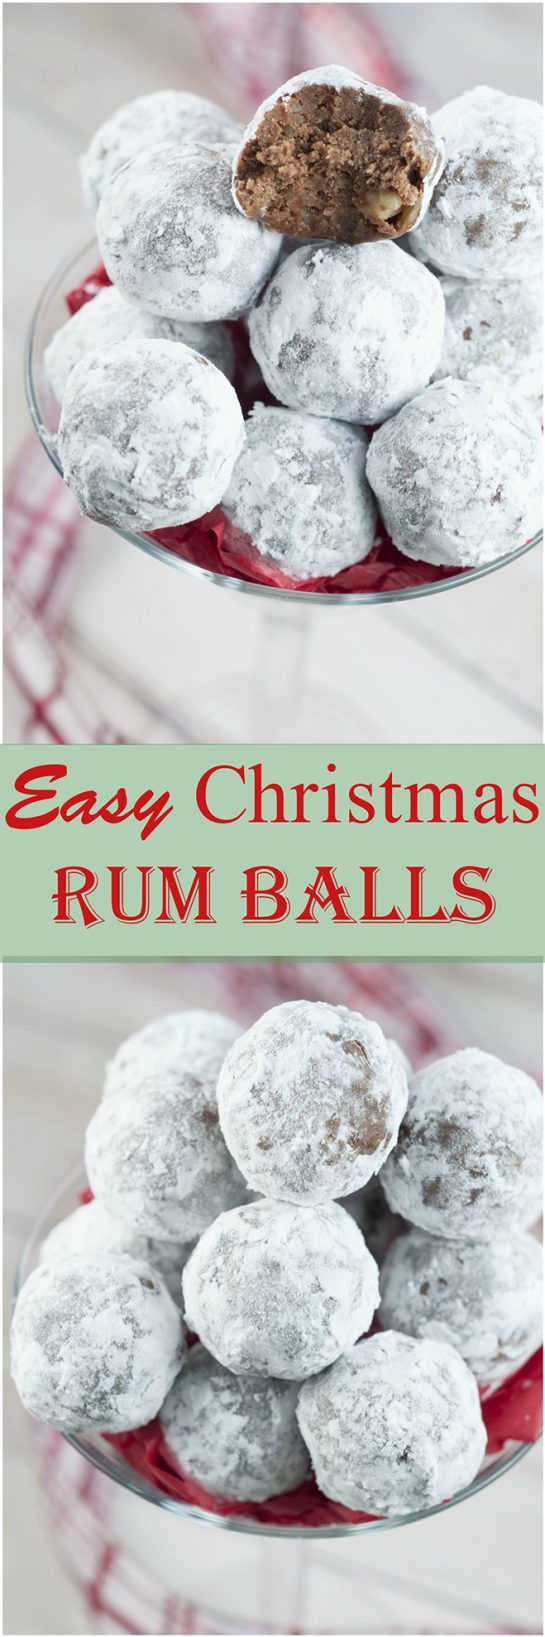 Easy Christmas Rum Balls | Wishes and Dishes